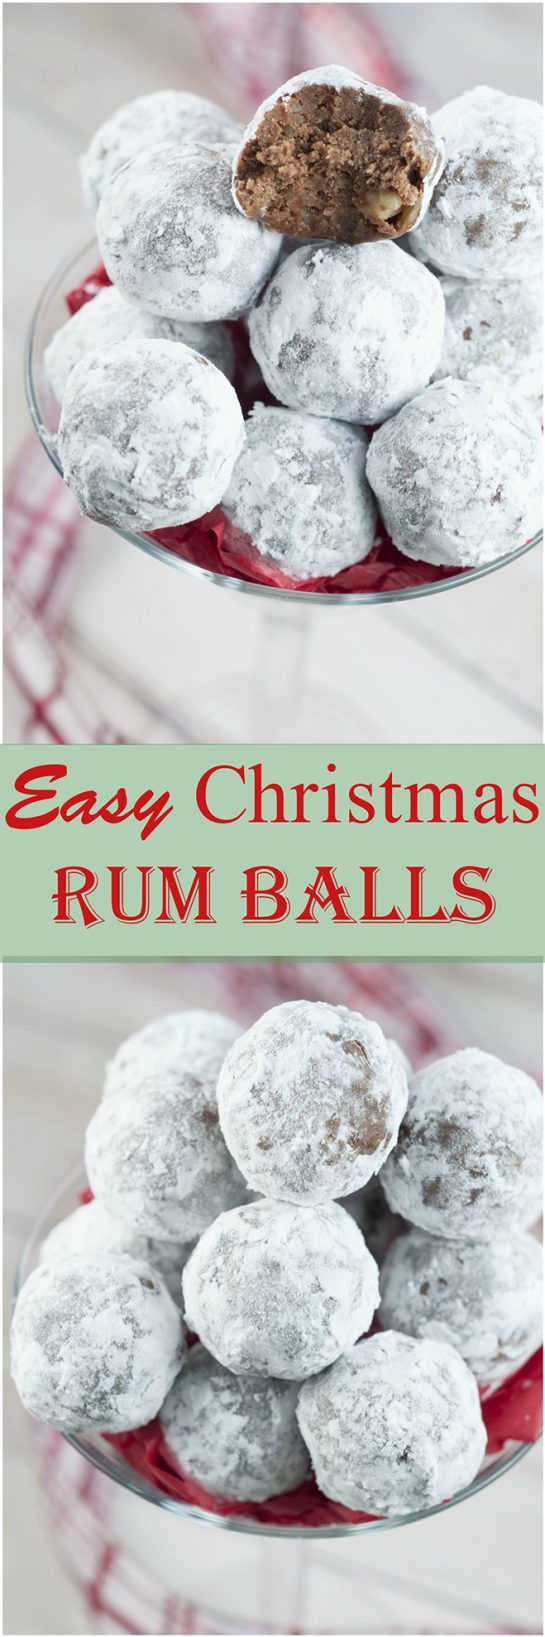 Easy Christmas Rum Balls | Wishes and Dishes